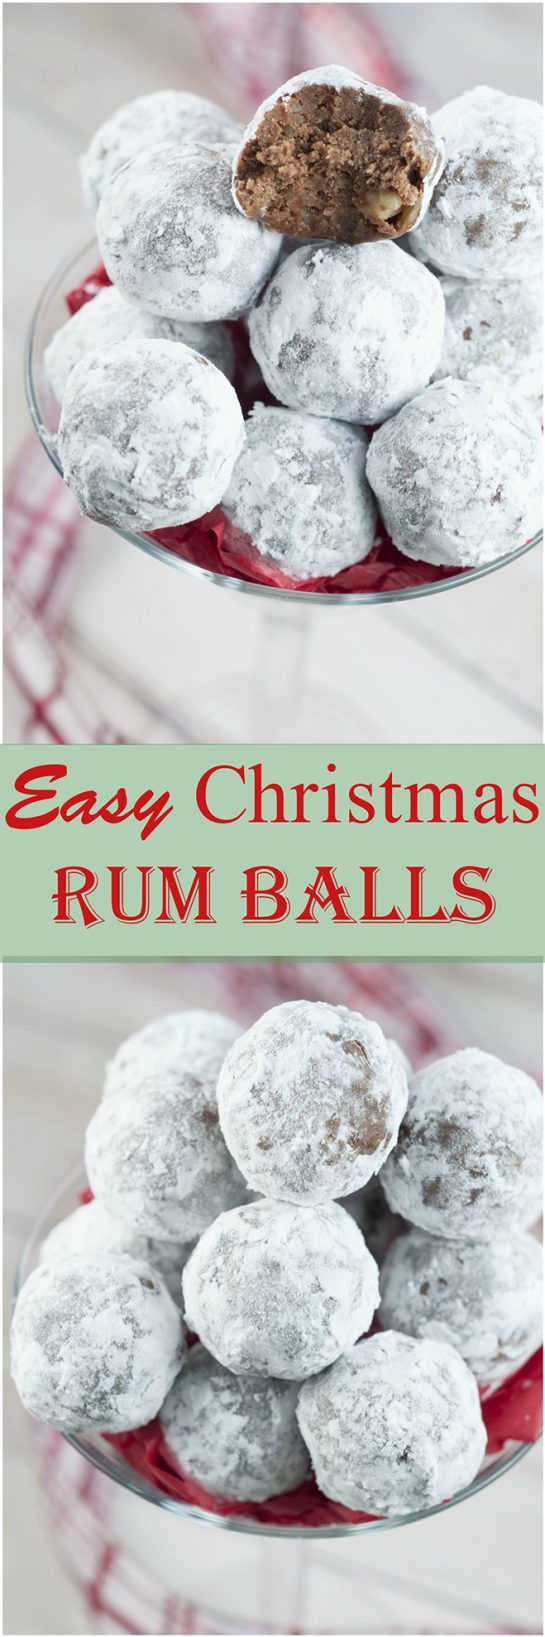 Easy Christmas Rum Balls | Wishes and Dishes